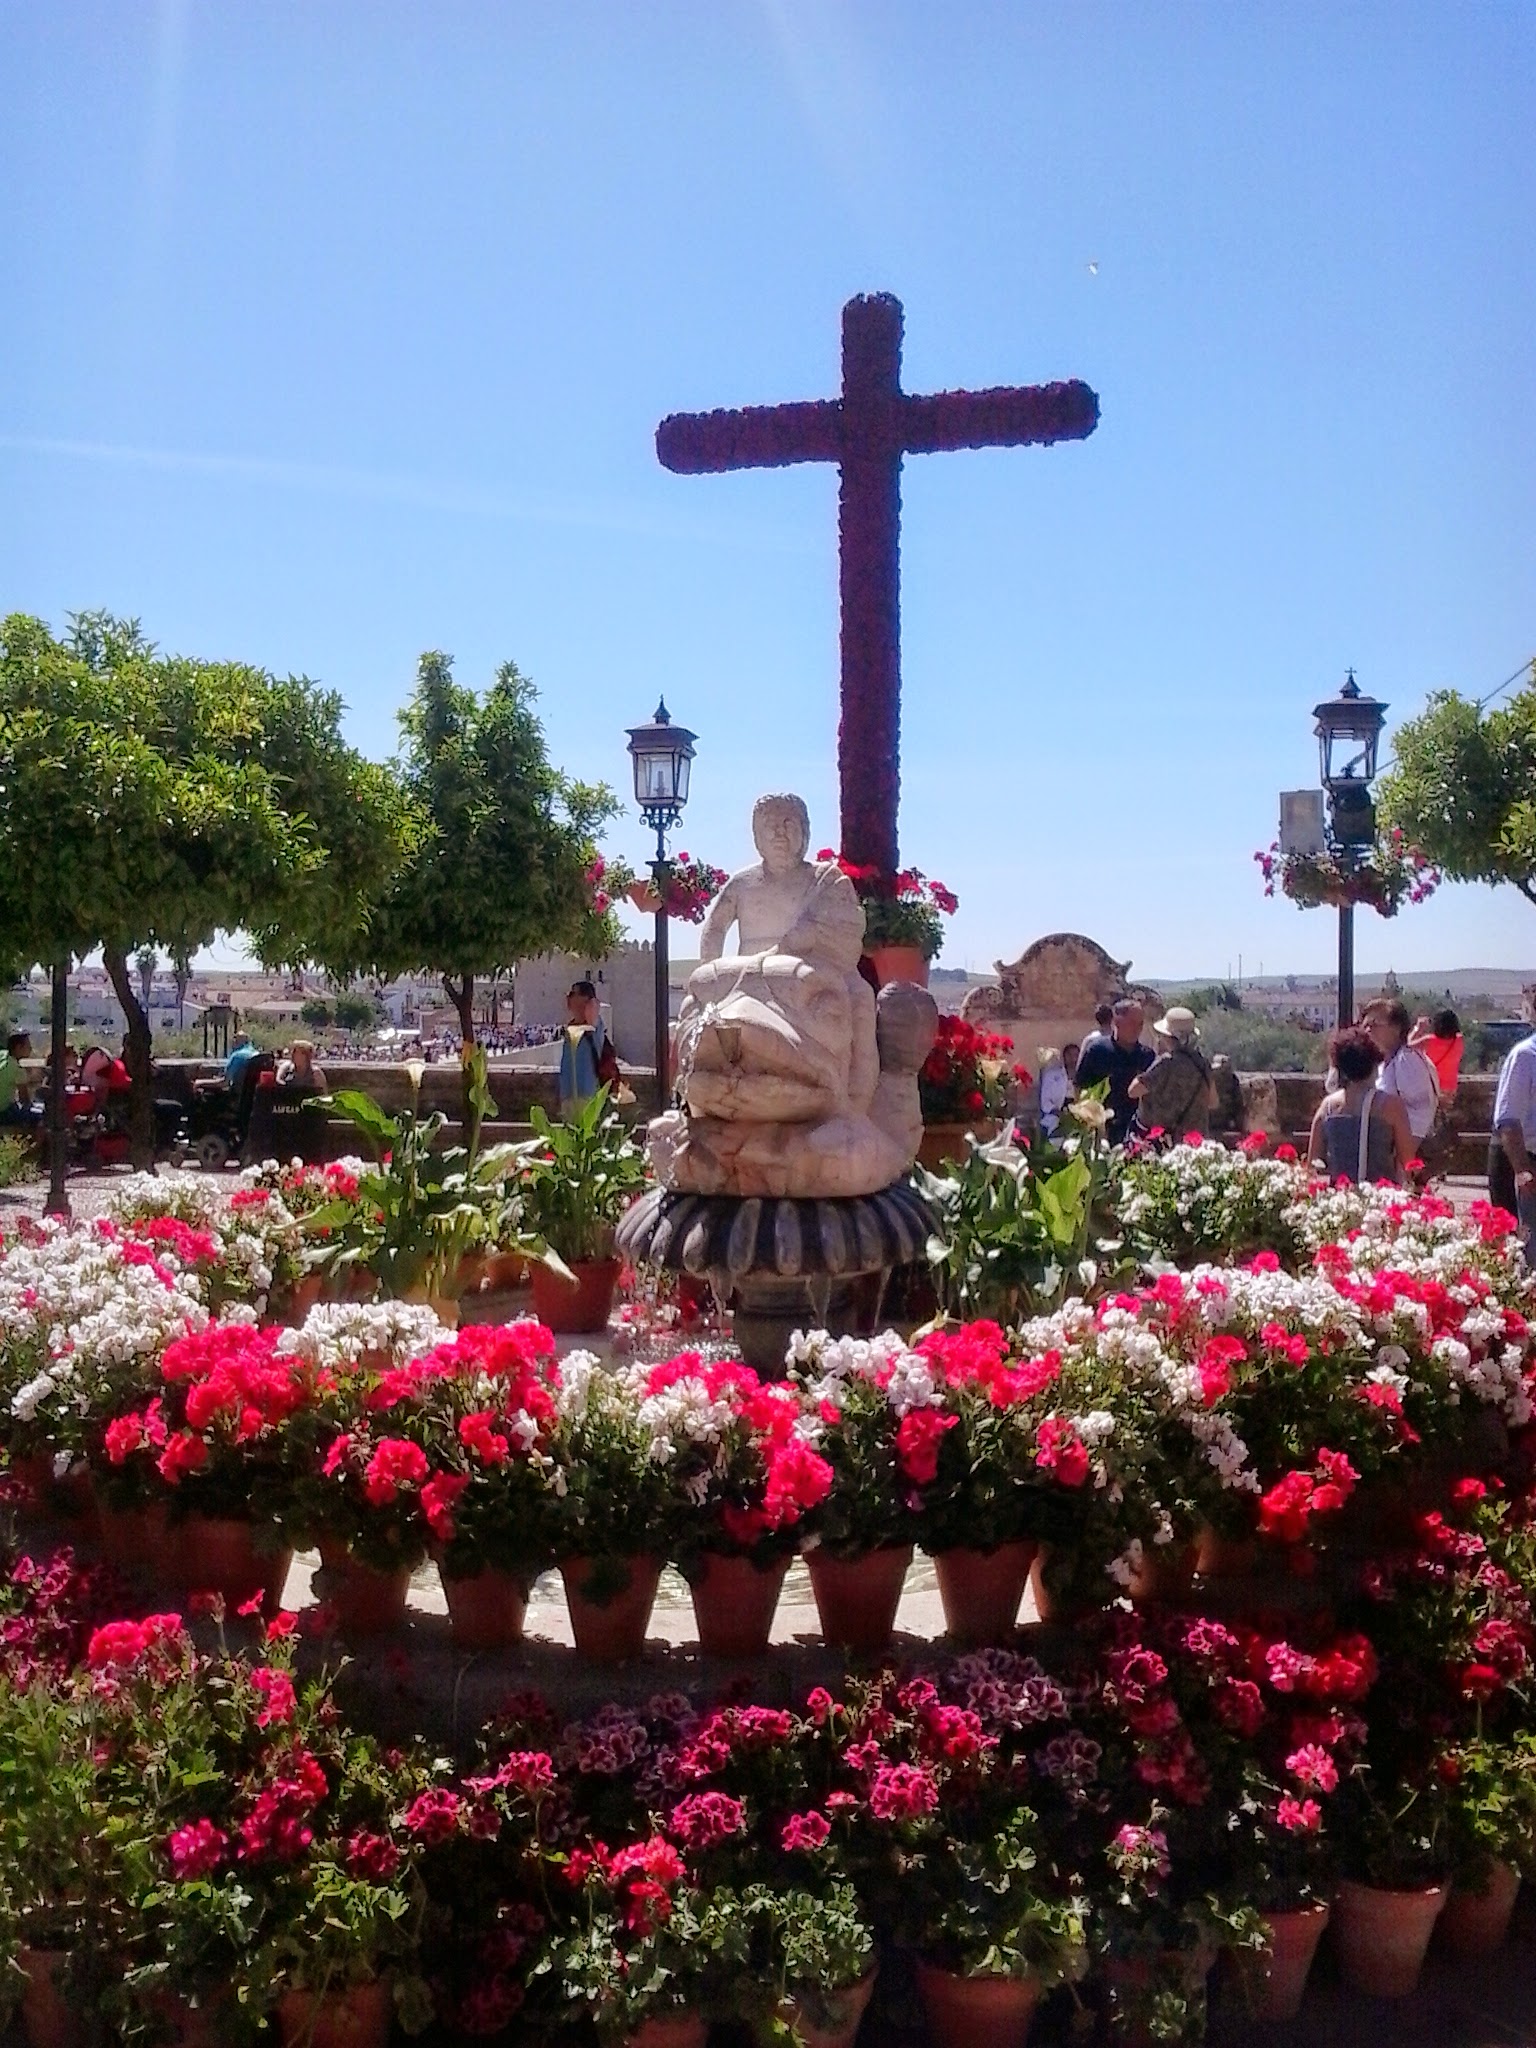 If you visit at the beginning of May, you can enjoy Las Cruces celebration.